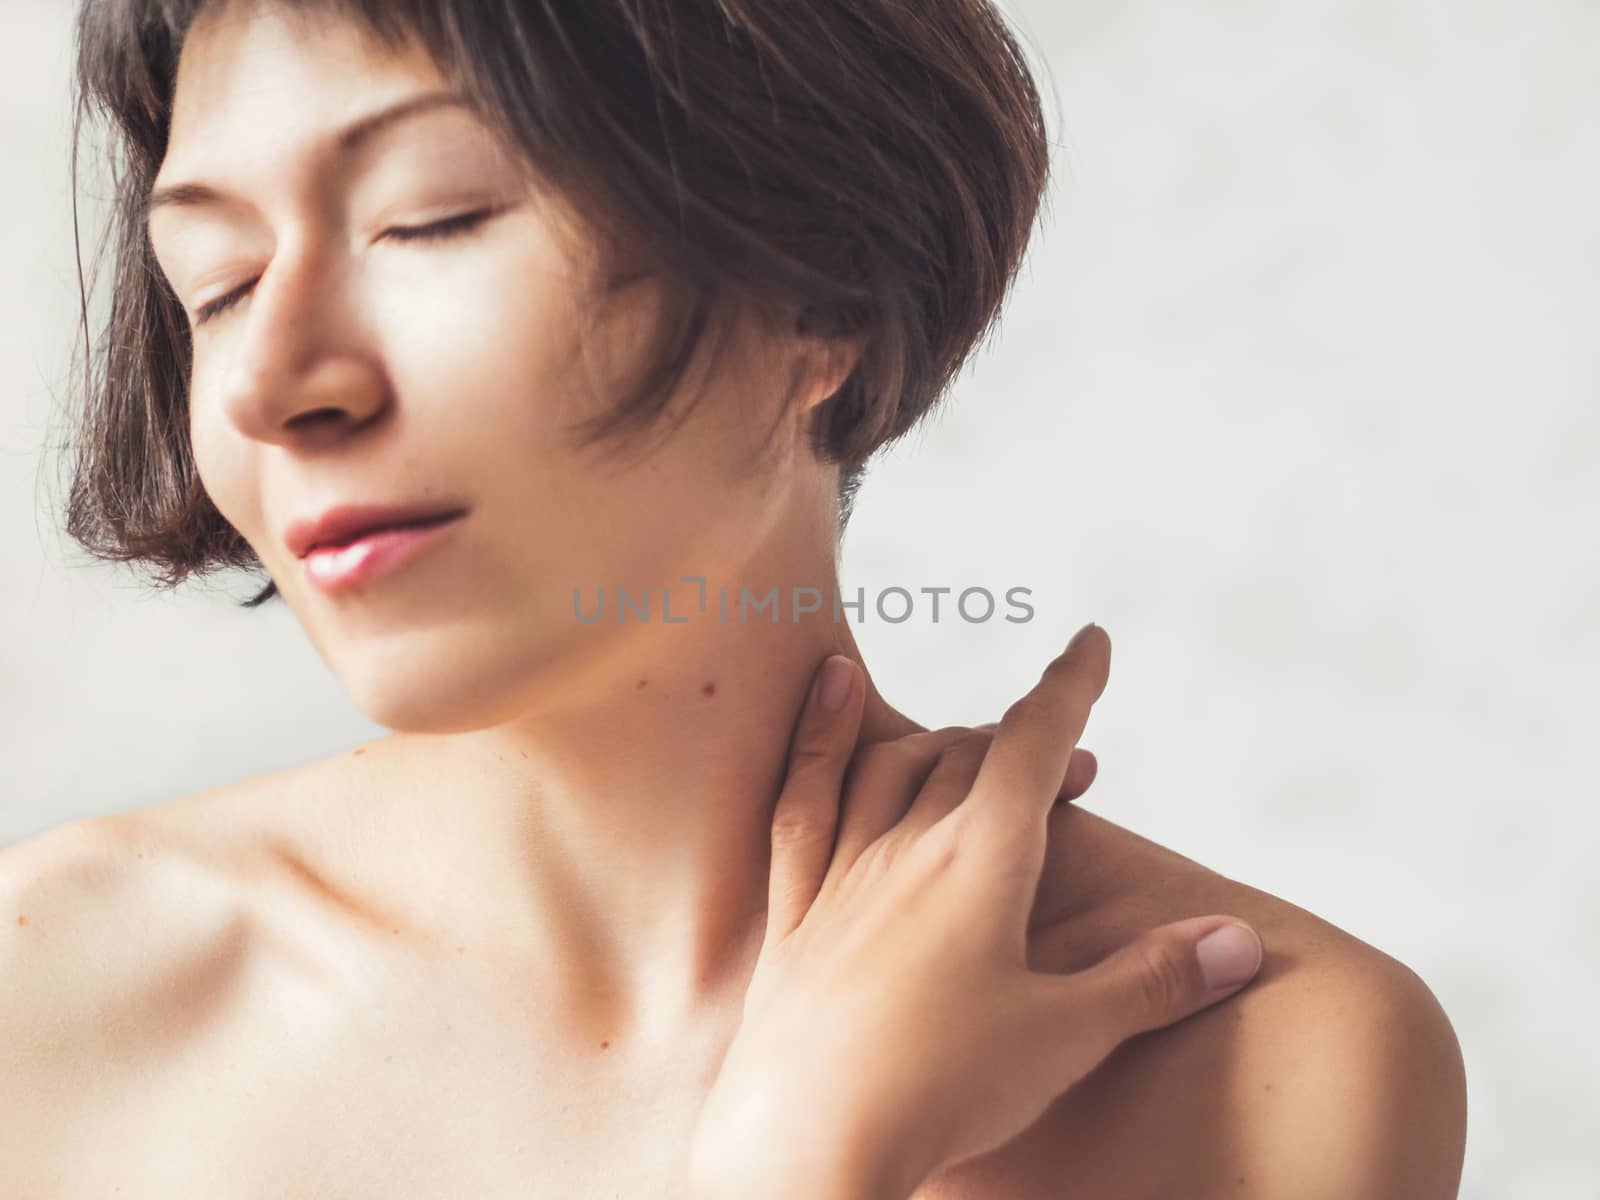 Close up portrait of woman on white background. Natural beauty without make up.